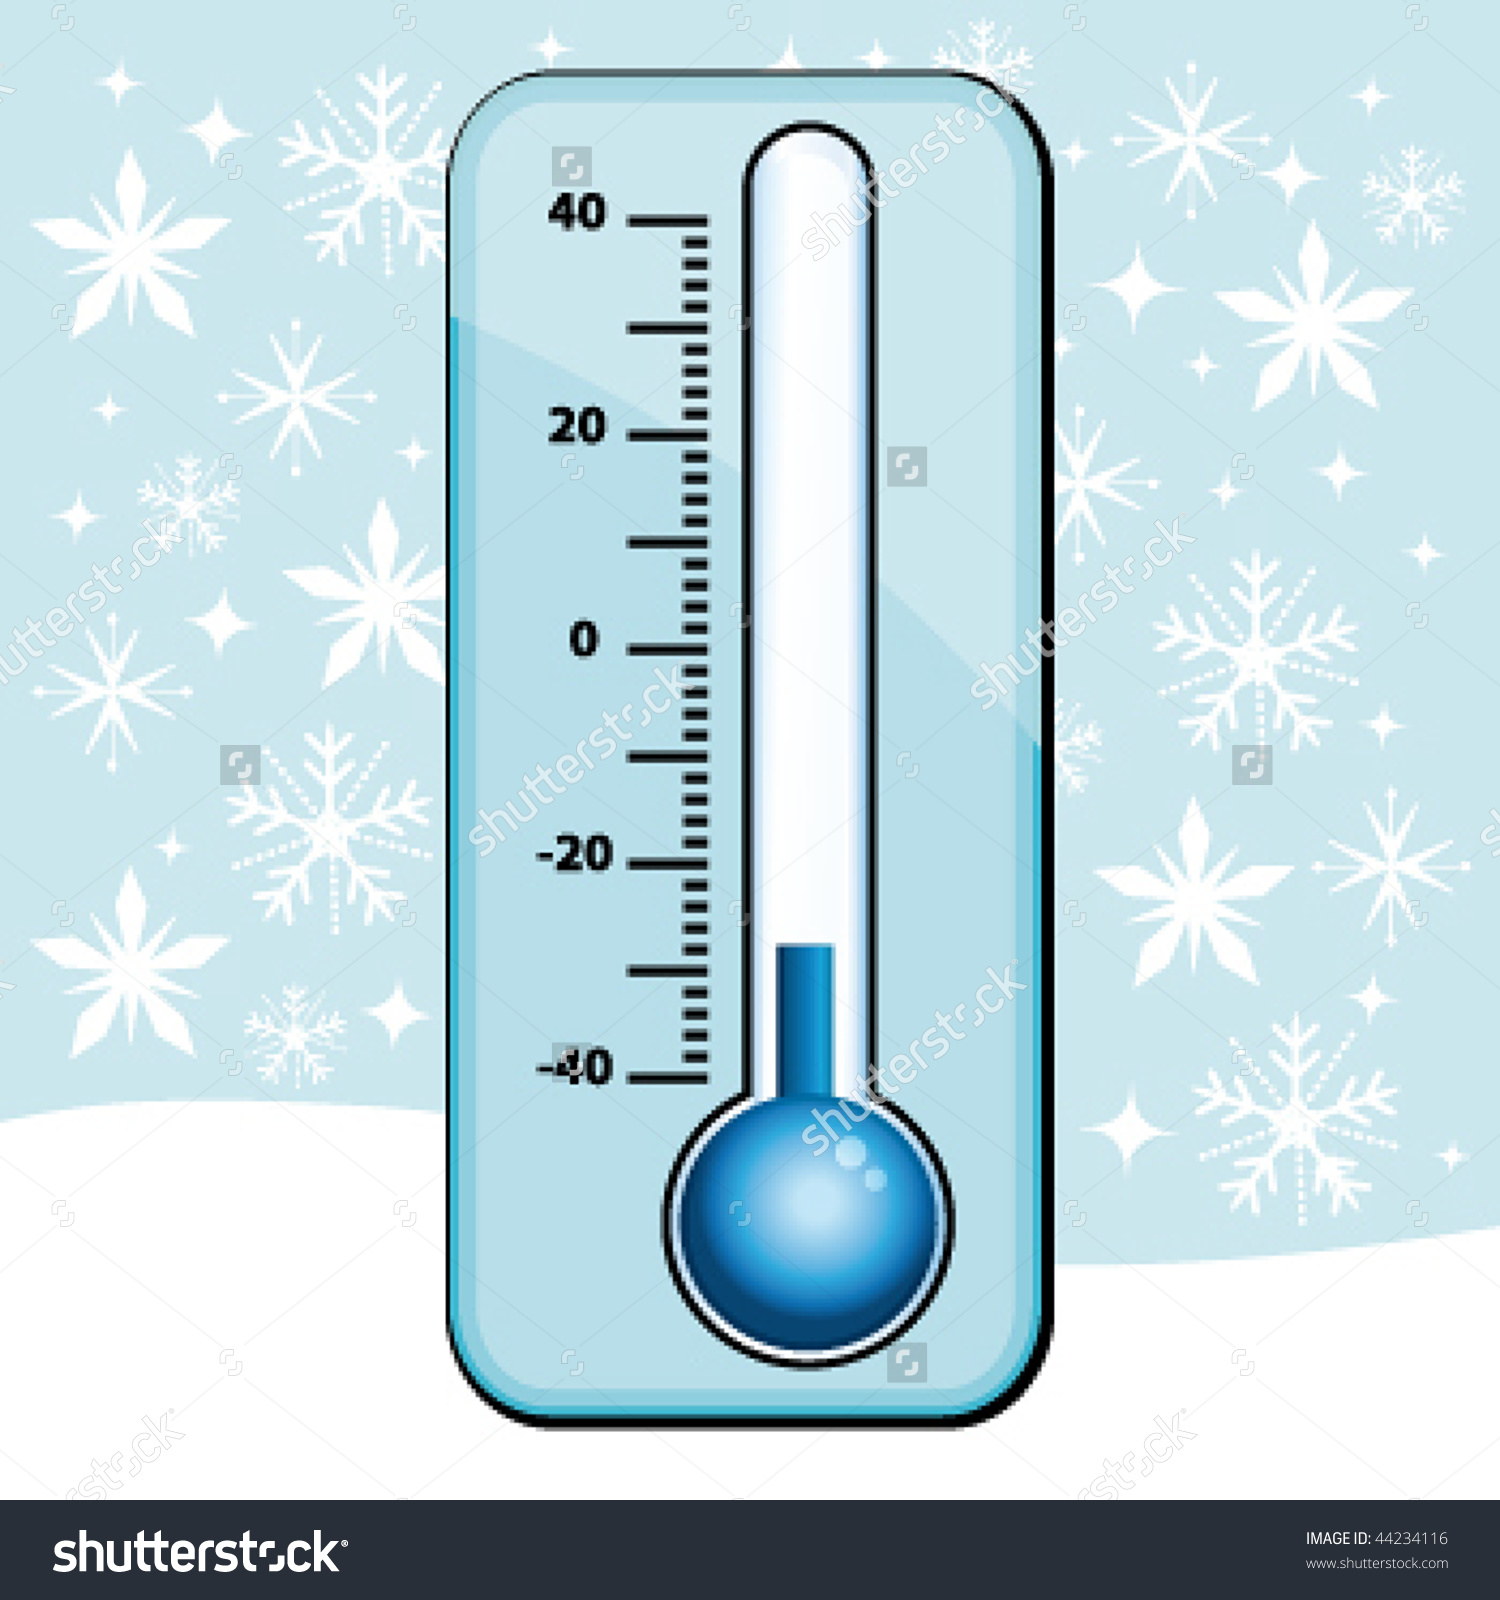 Free Cold Thermometer Cliparts, Download Free Clip Art, Free.